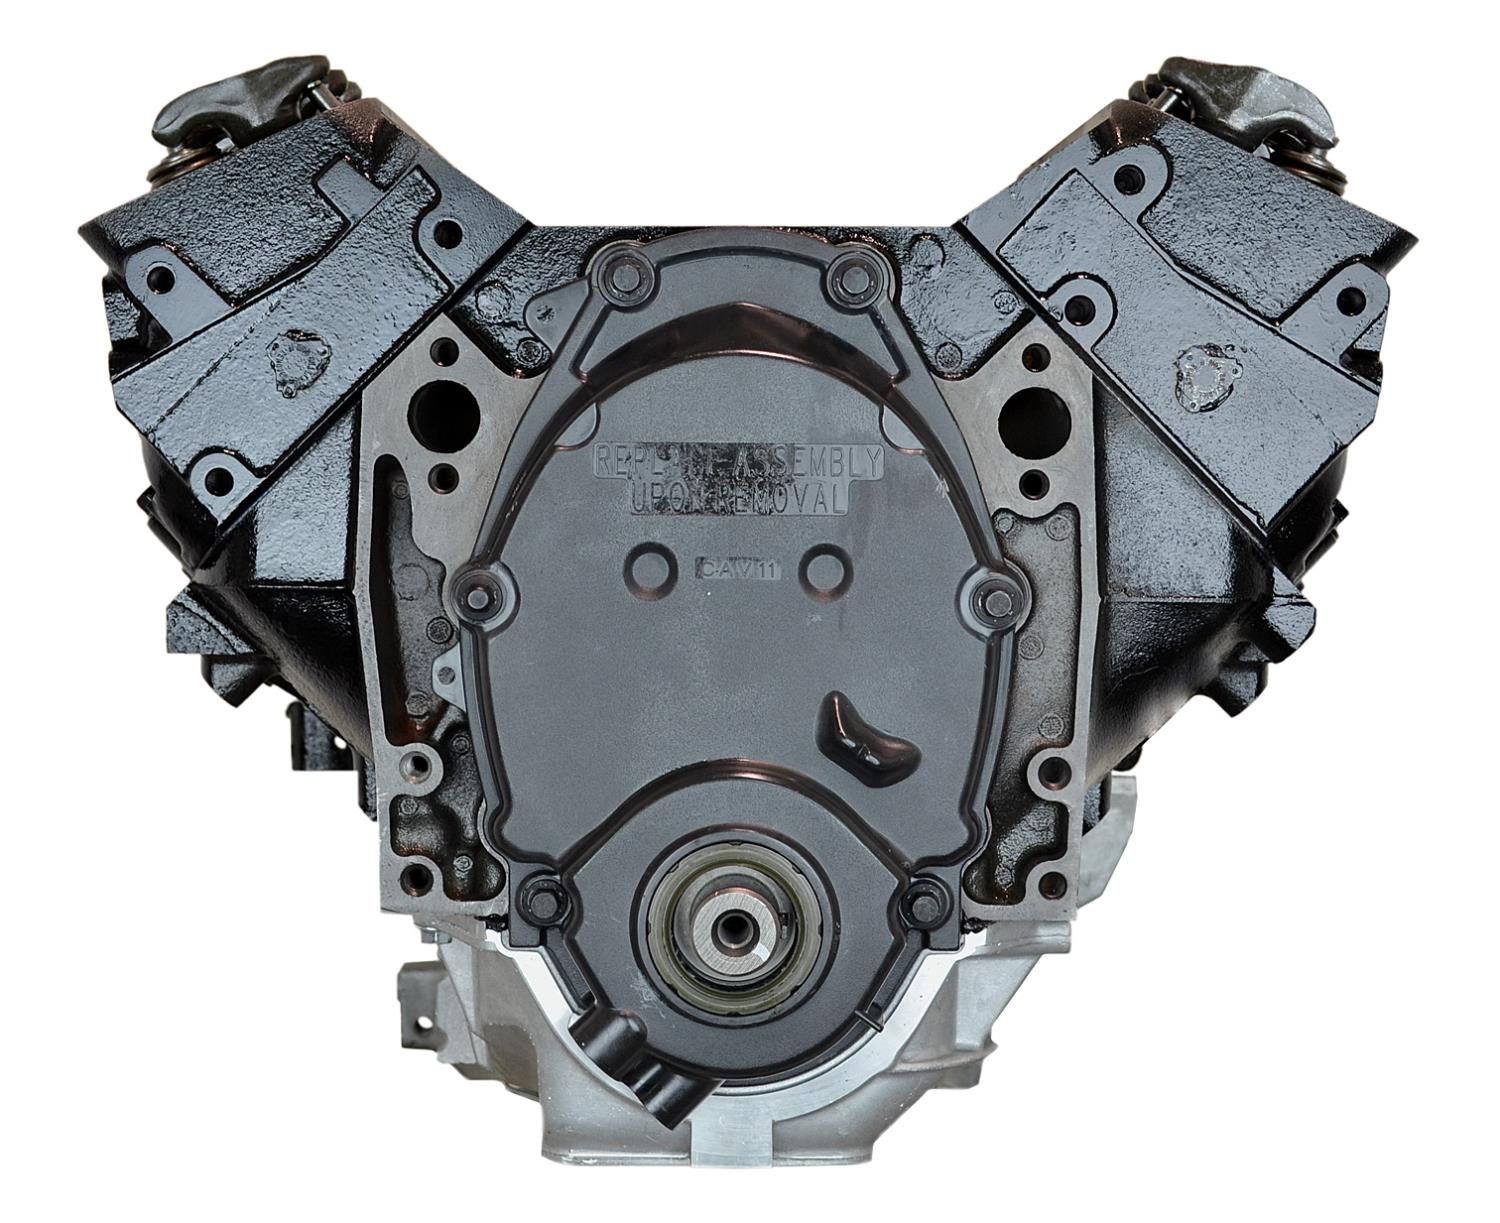 VCK9 Remanufactured Crate Engine for 1996-1999 Chevy/GMC C/K Truck, SUV, & Van with 4.3L V6